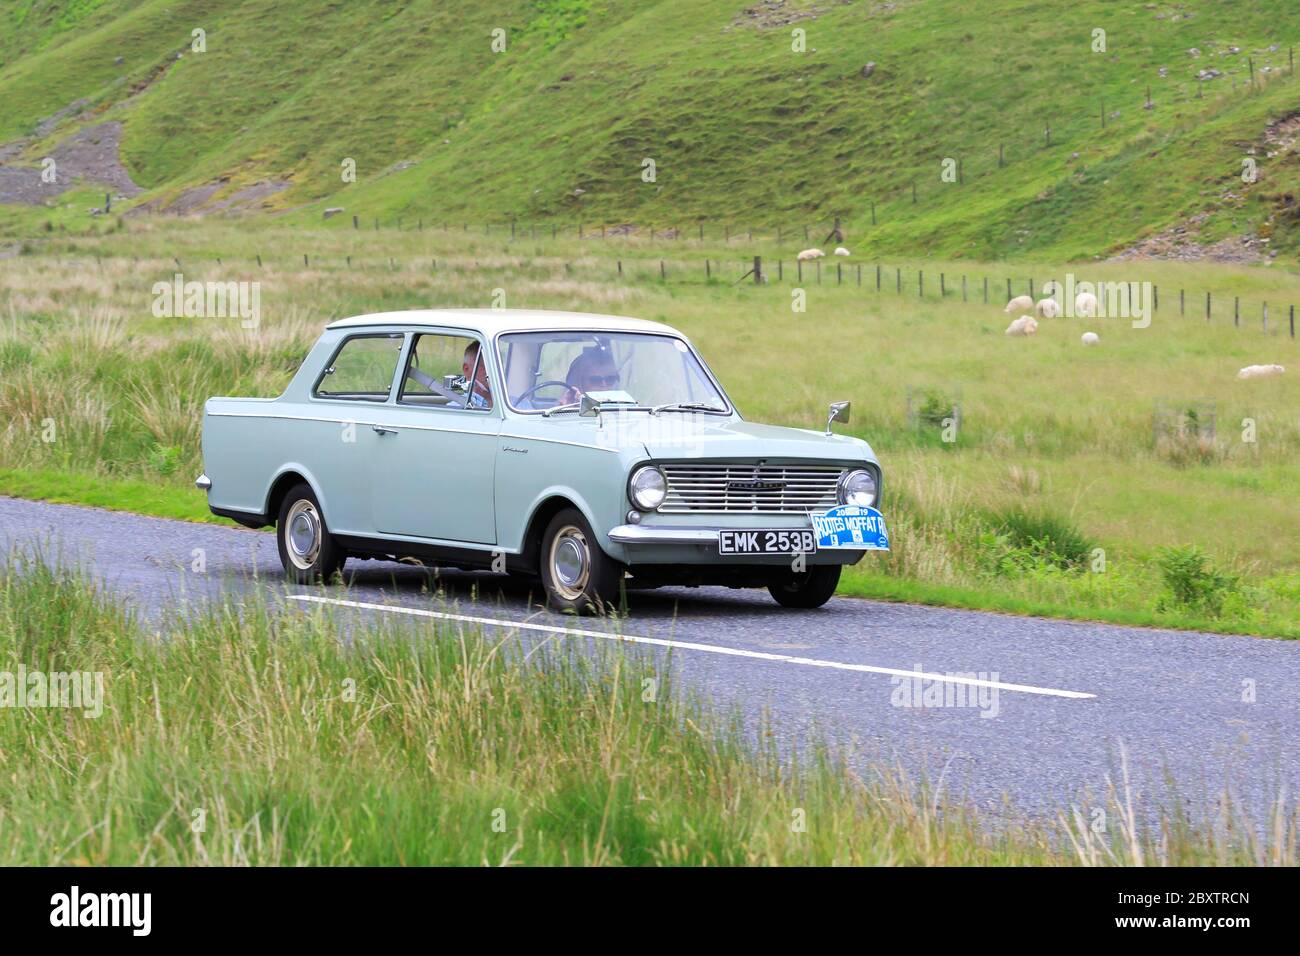 MOFFAT, SCOTLAND - JUNE 29, 2019: 1964 Vauxhall Viva HA Deluxe saloon  car in a classic car rally en route towards the town of Moffat, Dumfries and Ga Stock Photo